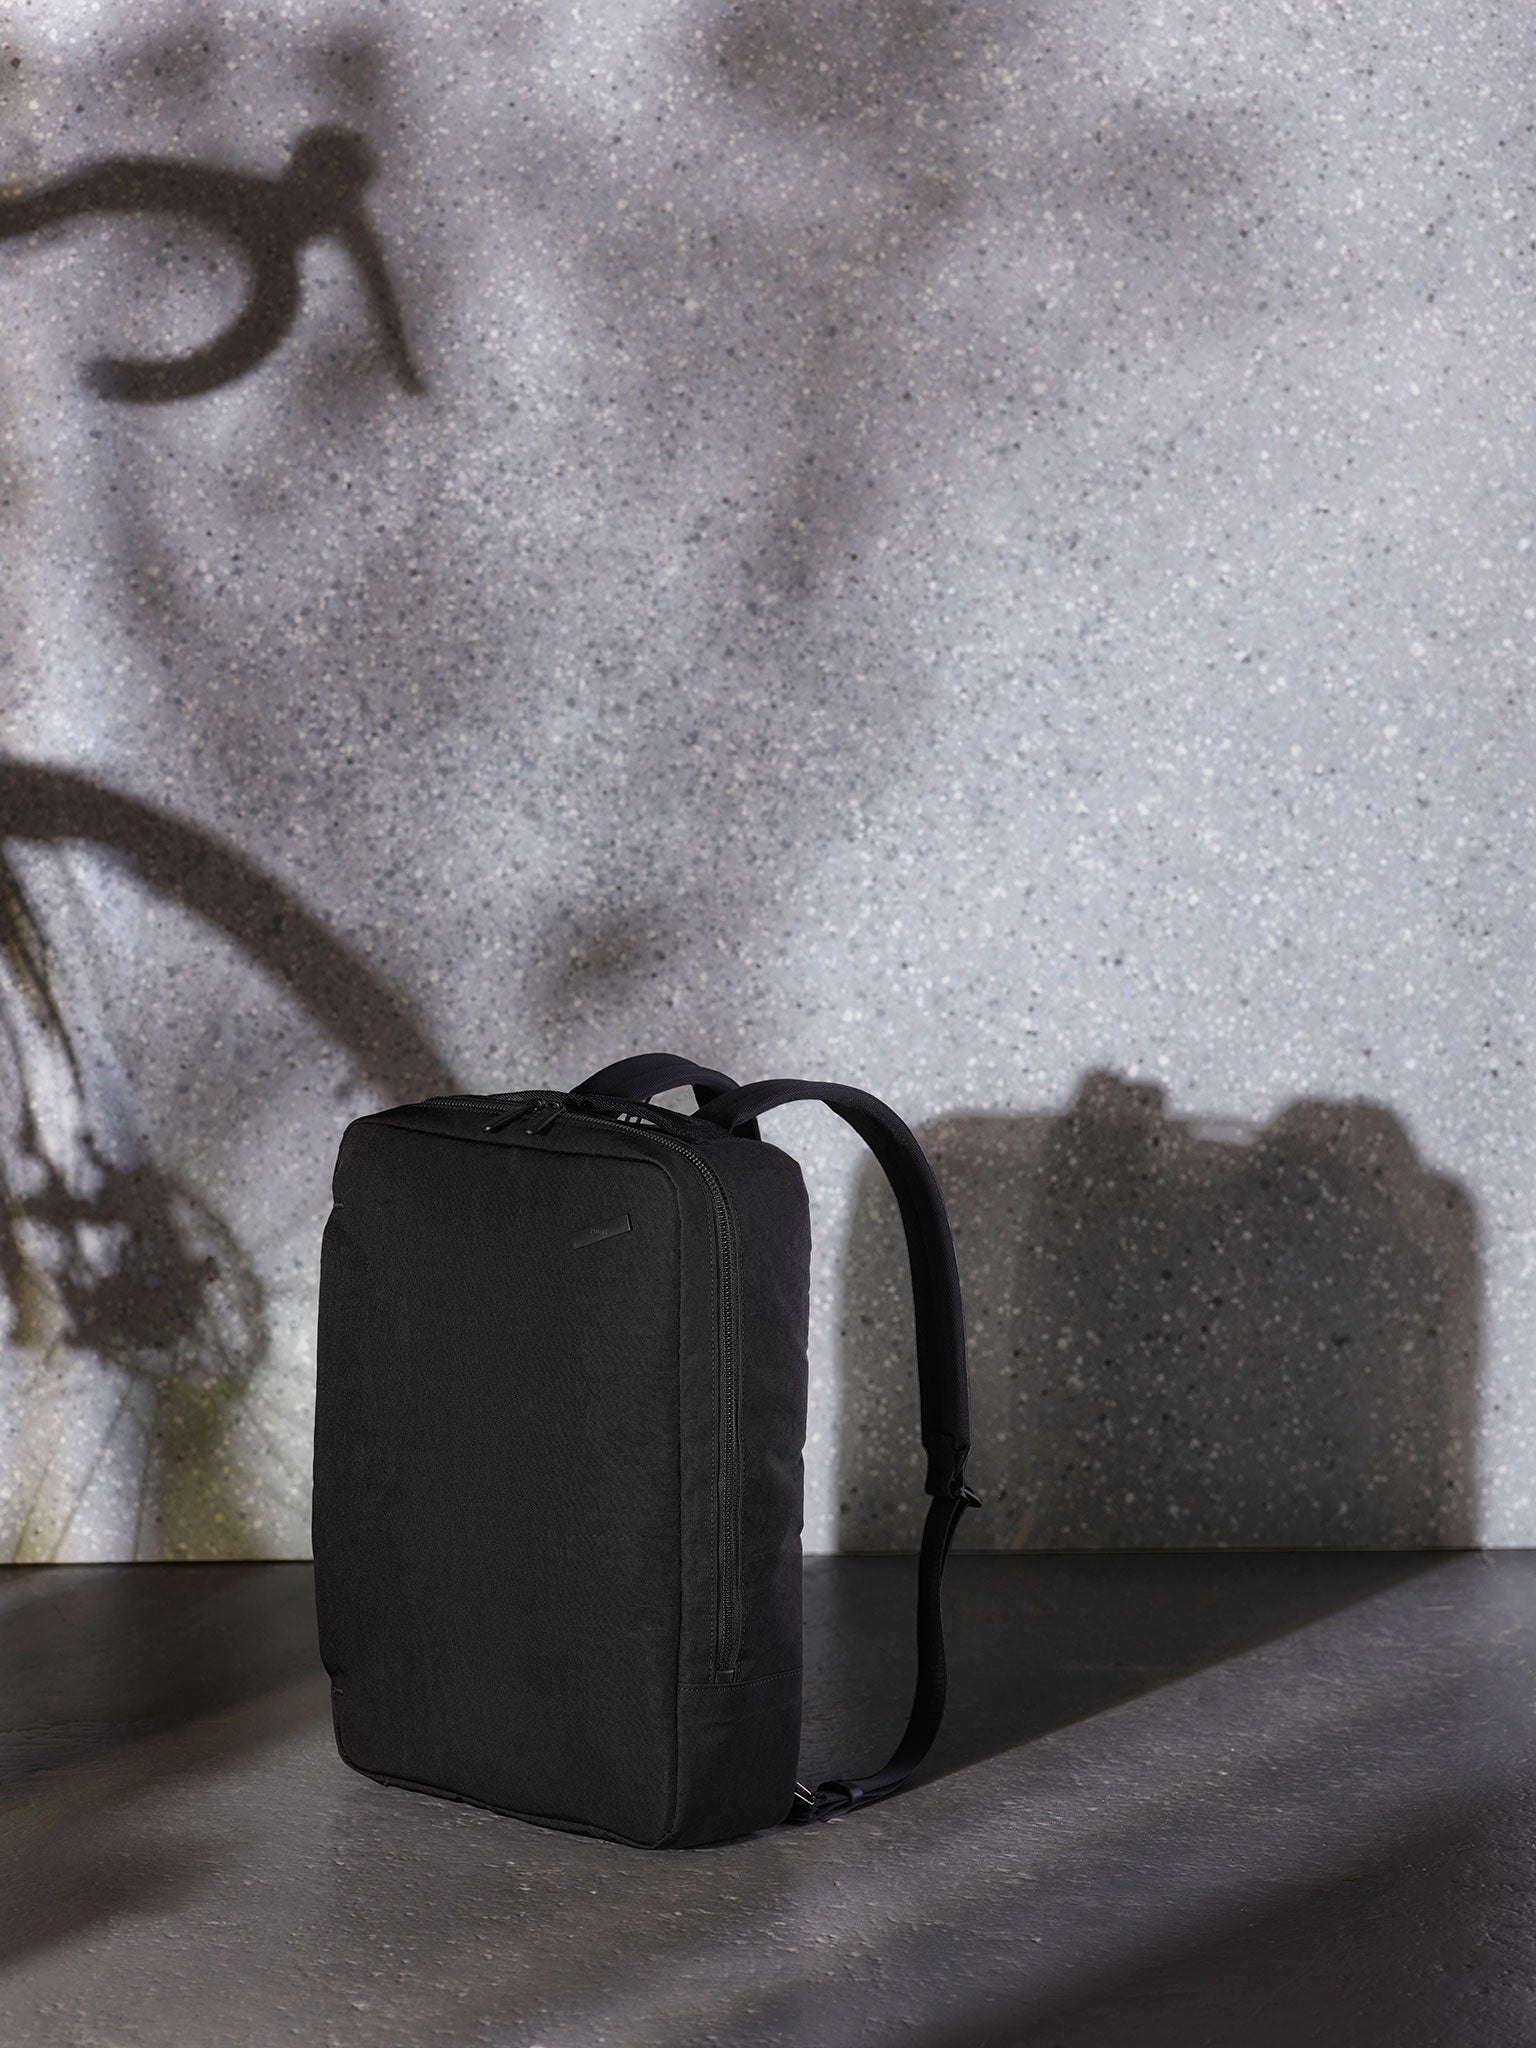 A versatile black backpack for travel, featuring a waterproof exterior and spacious compartments for clothes, electronics, and other travel essentials.